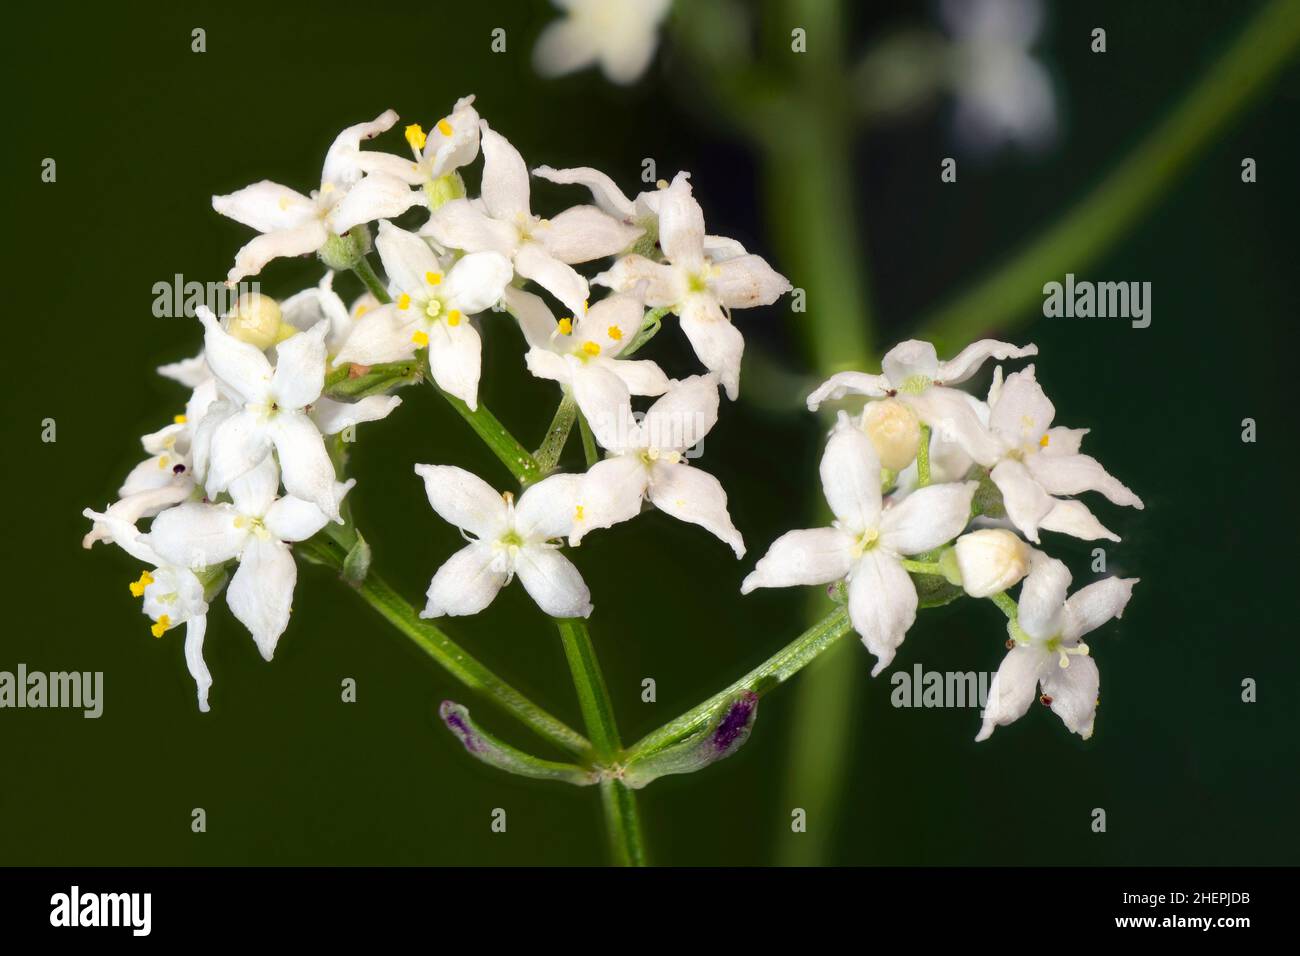 Great hedge bedstraw, Smooth bedstraw (Galium mollugo), Part of an inflorescence, close-up, Germany, Bavaria, Murnauer Moos Stock Photo